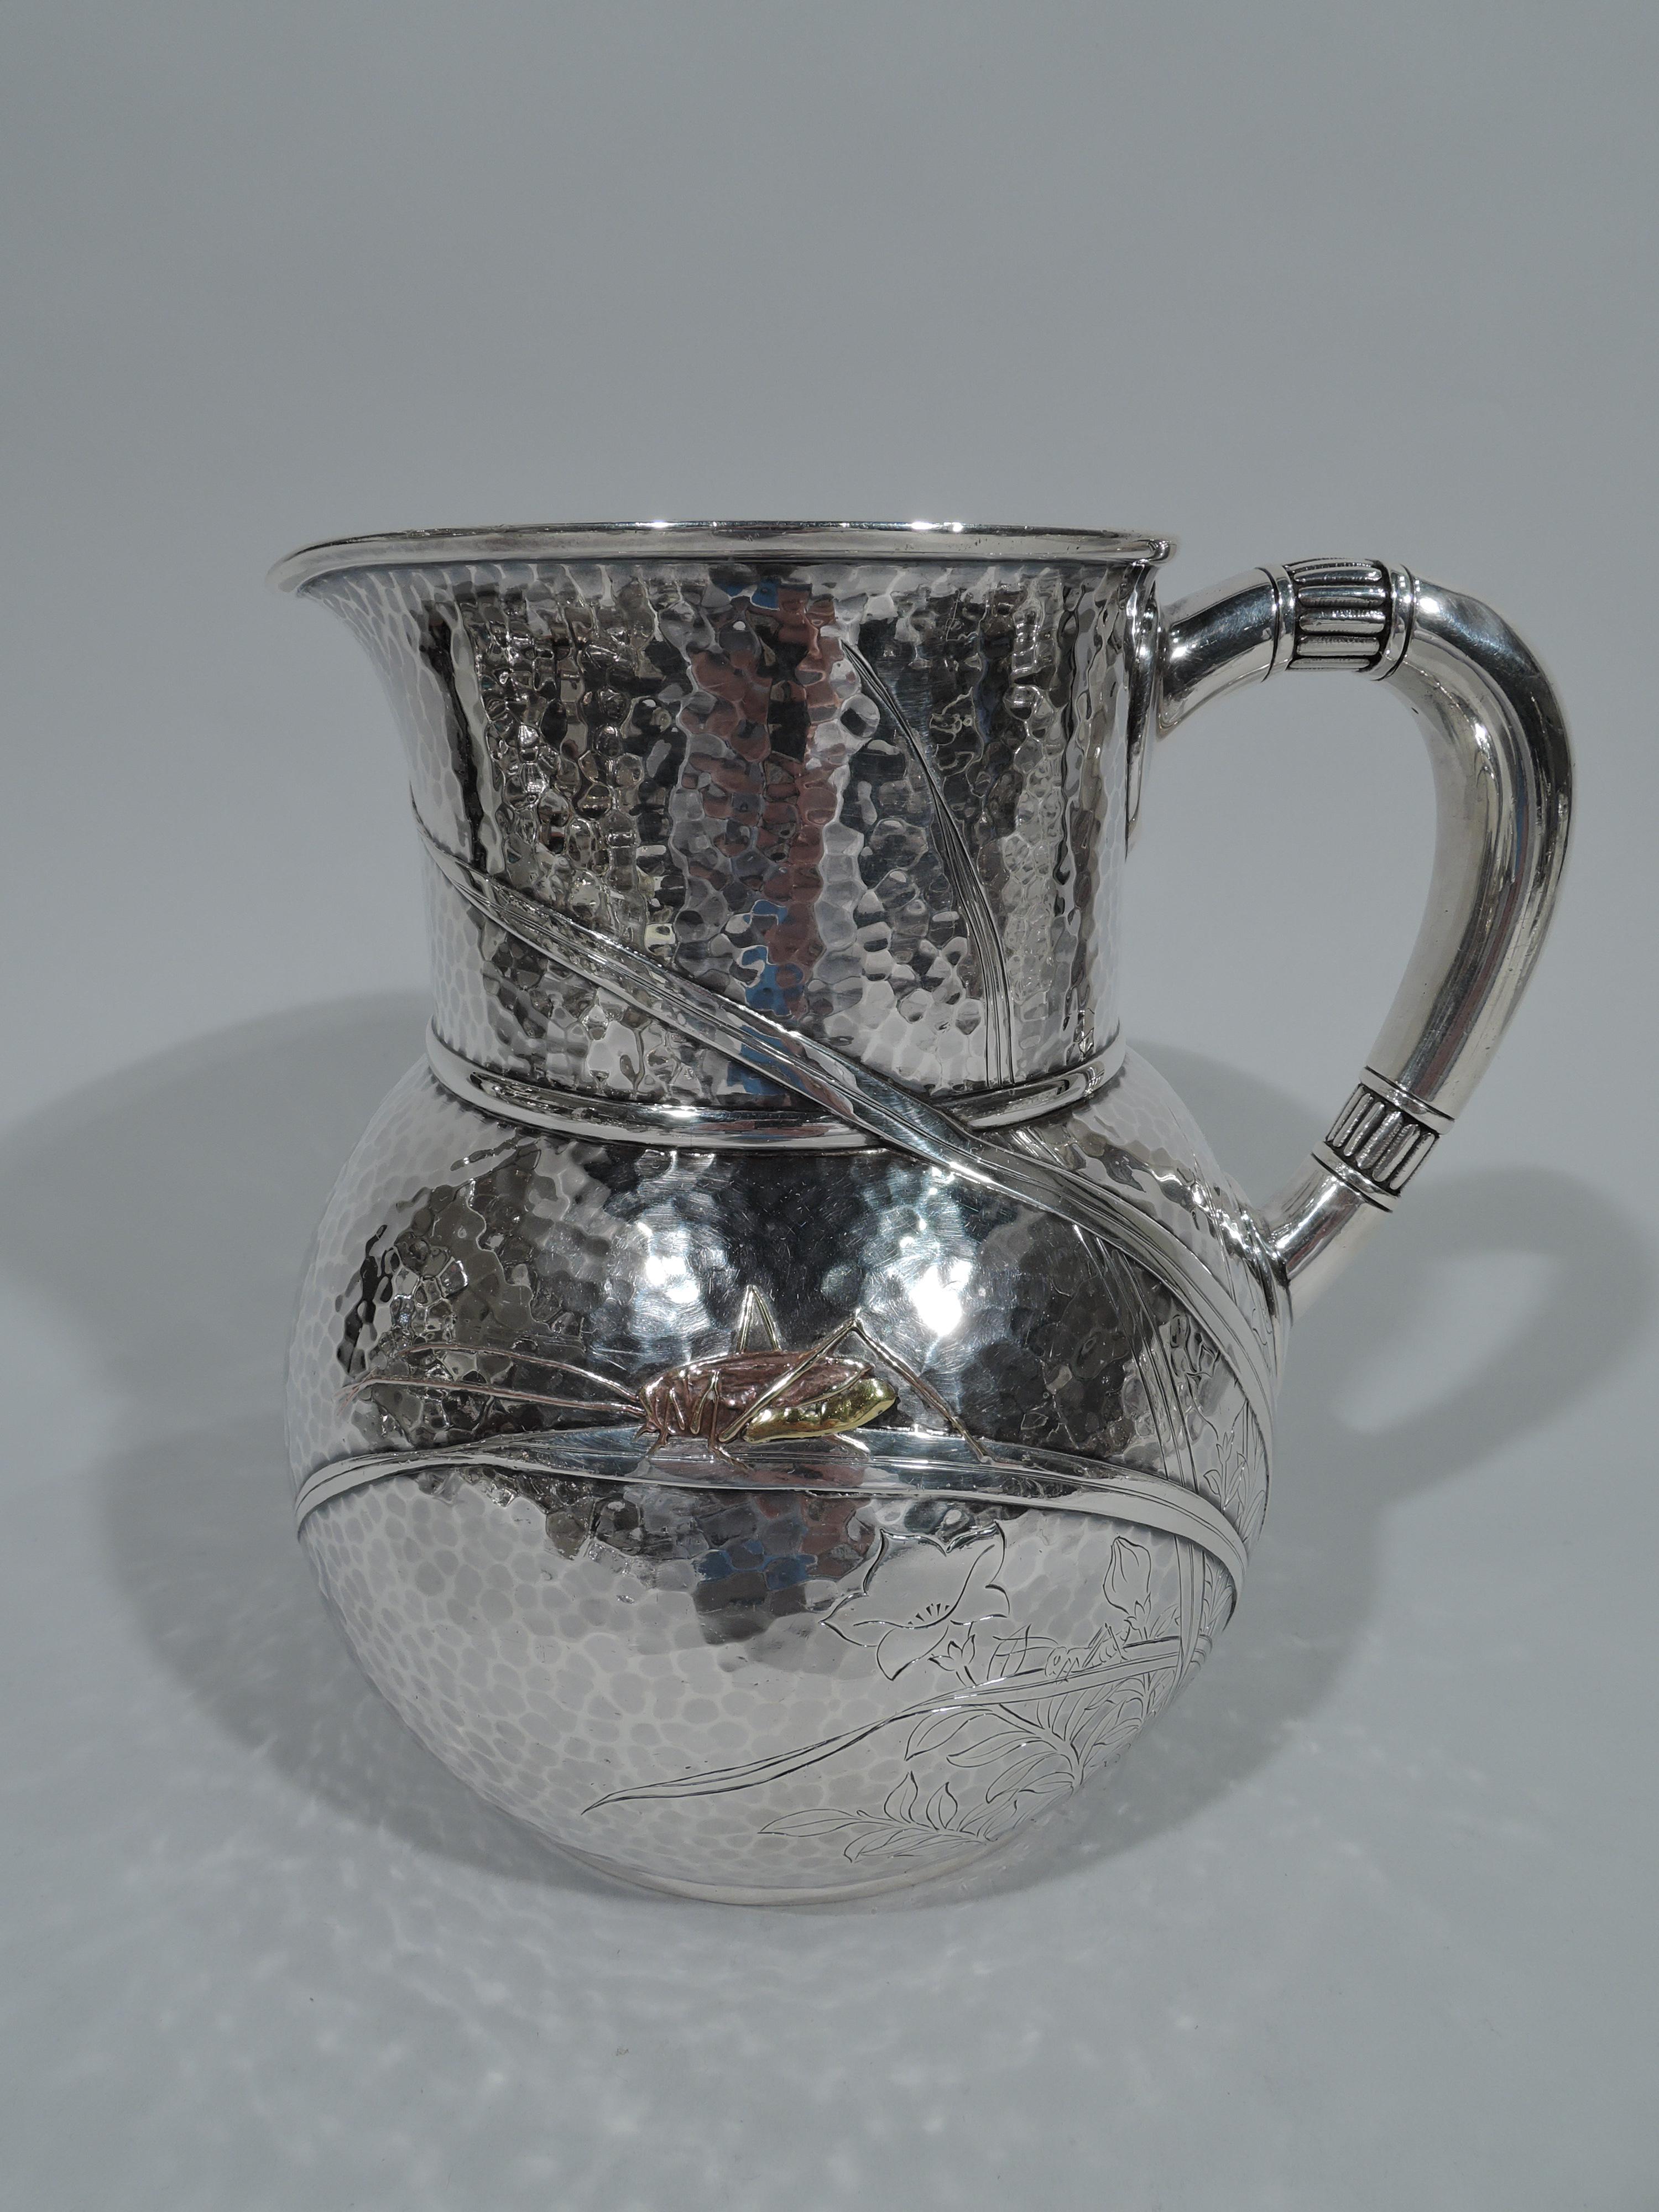 Rare mixed metal pitcher with lots of bugs. Made by Tiffany & Co. in New York. Globular with drum-form neck, small lip spout, and c-scroll handle. Modish insects—dragon fly, grasshopper, and butterfly—creep and dart among fluid and interlaced grass